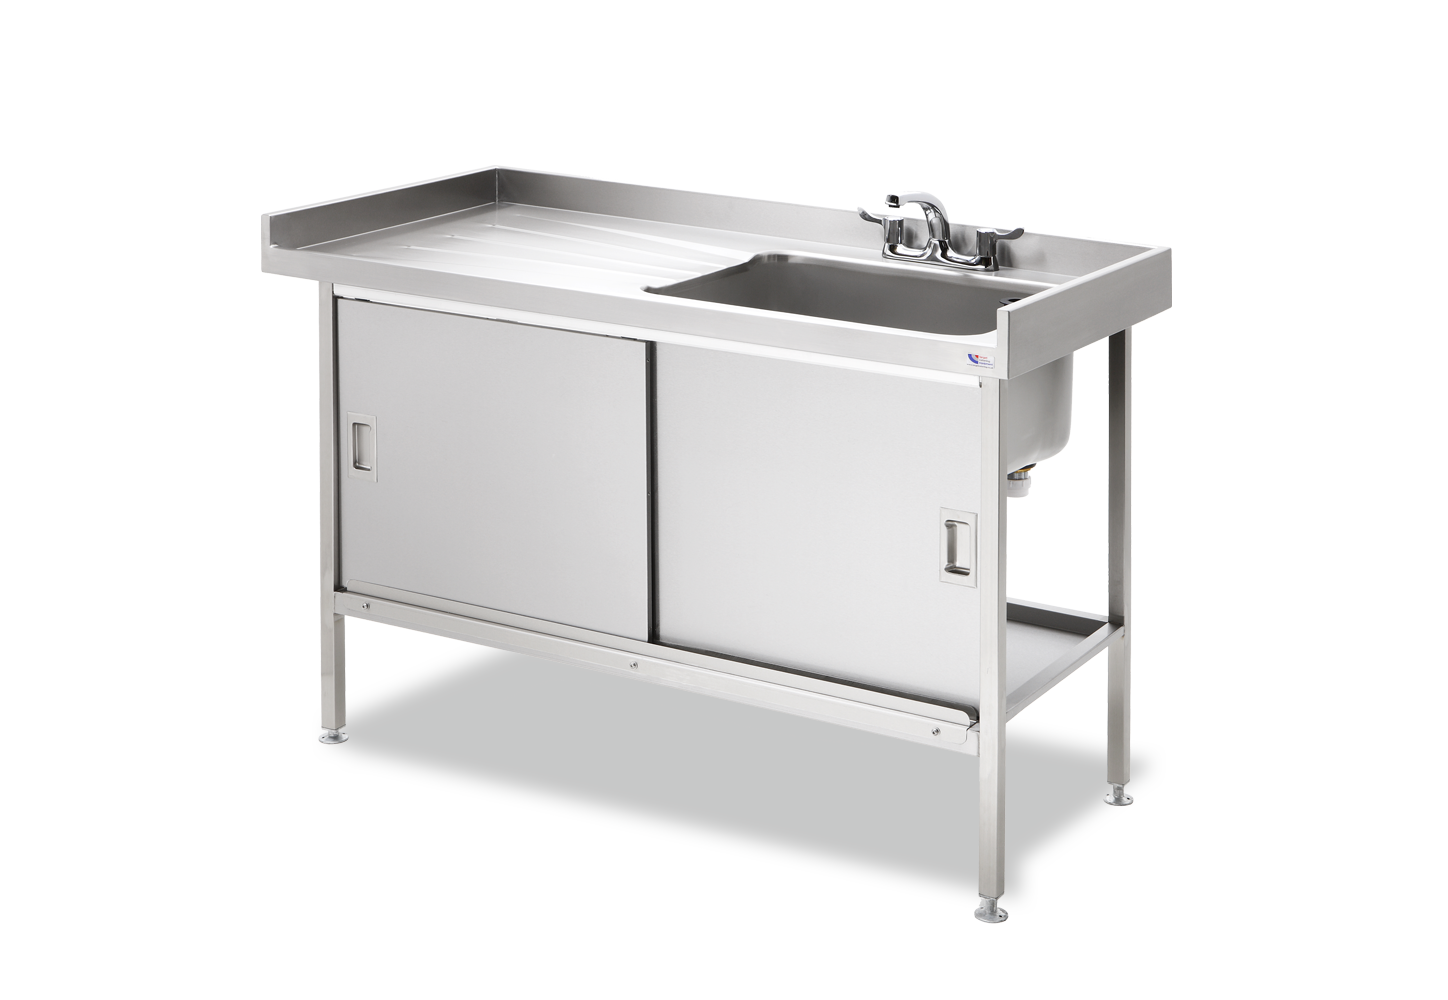 Commercial Stainless Steel Sink - Single Bowl Left-Hand Drainer with Sliding Doors